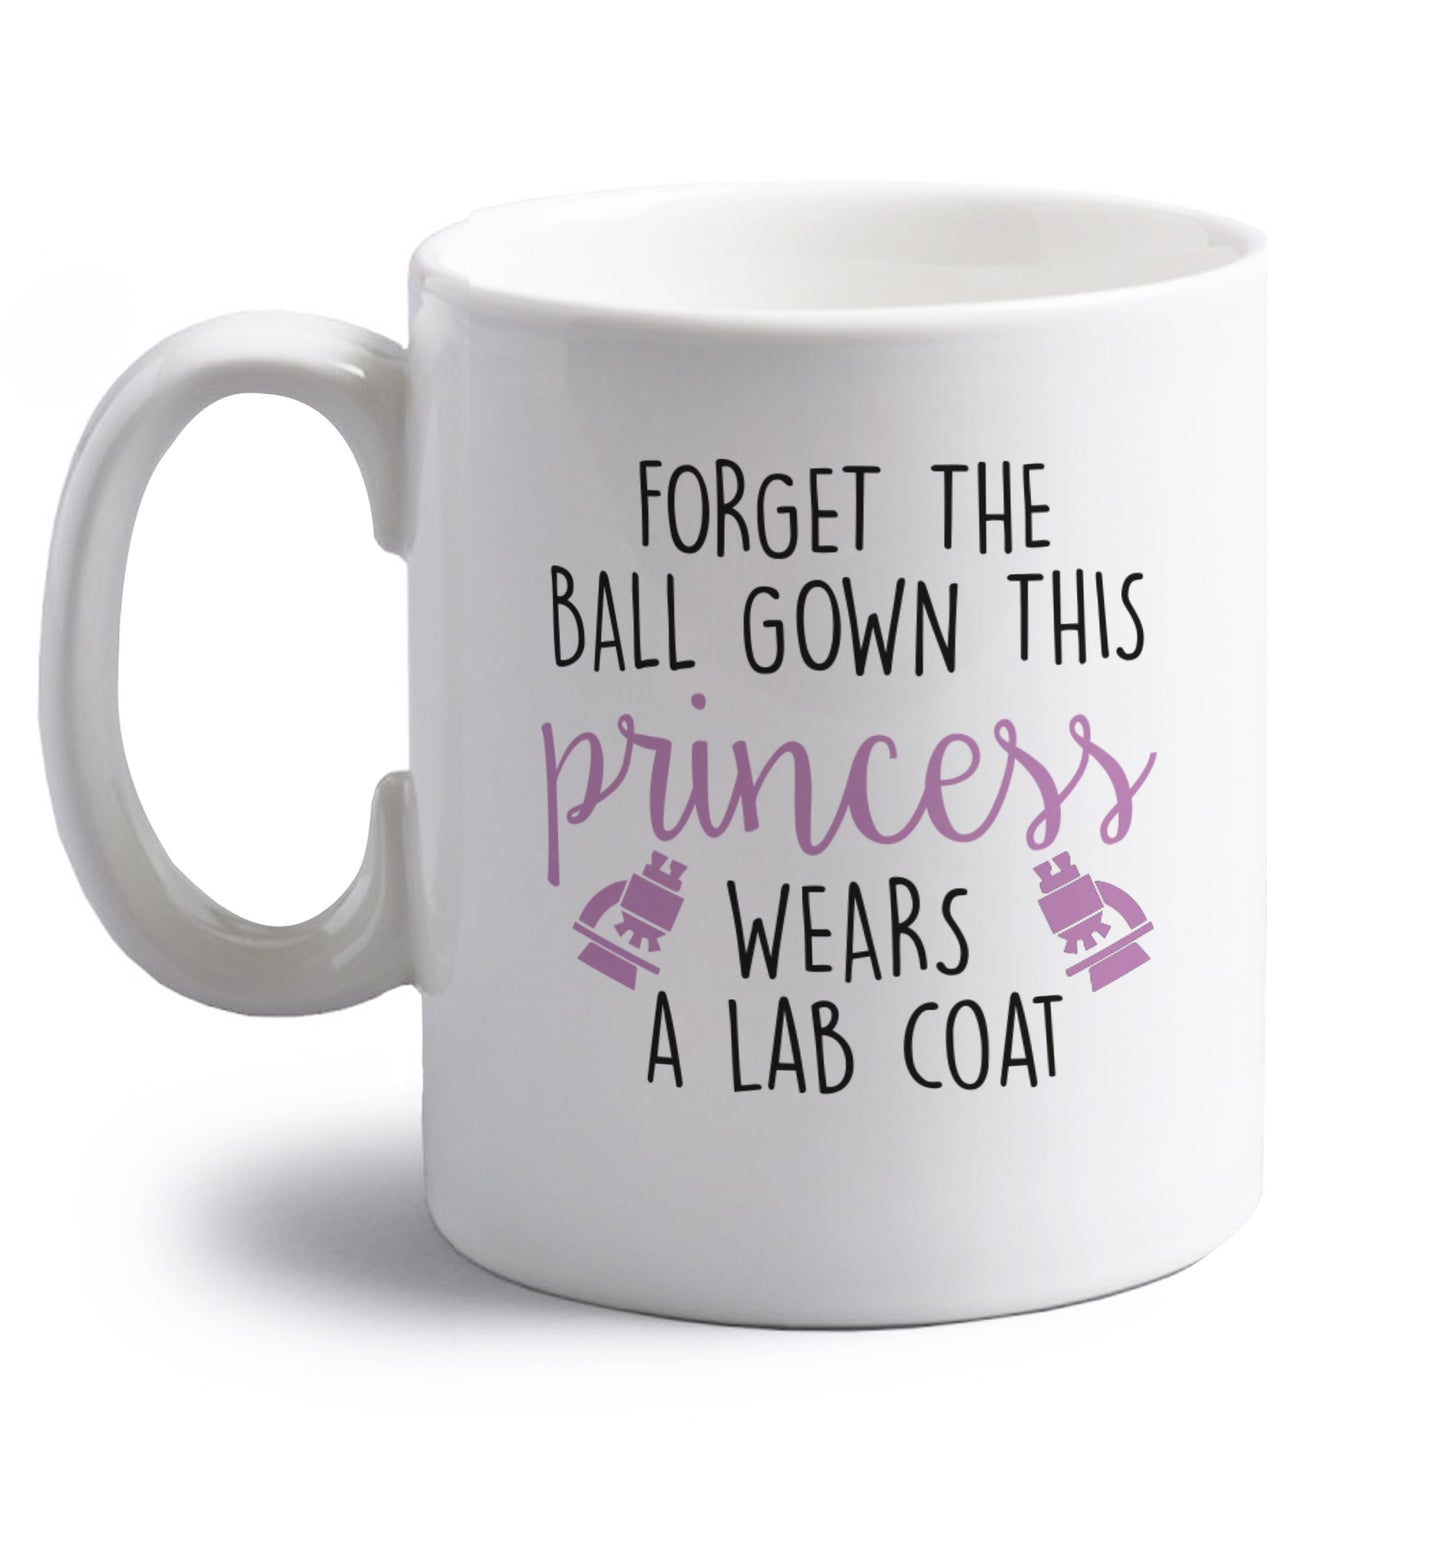 Forget the ball gown this princess wears a lab coat right handed white ceramic mug 